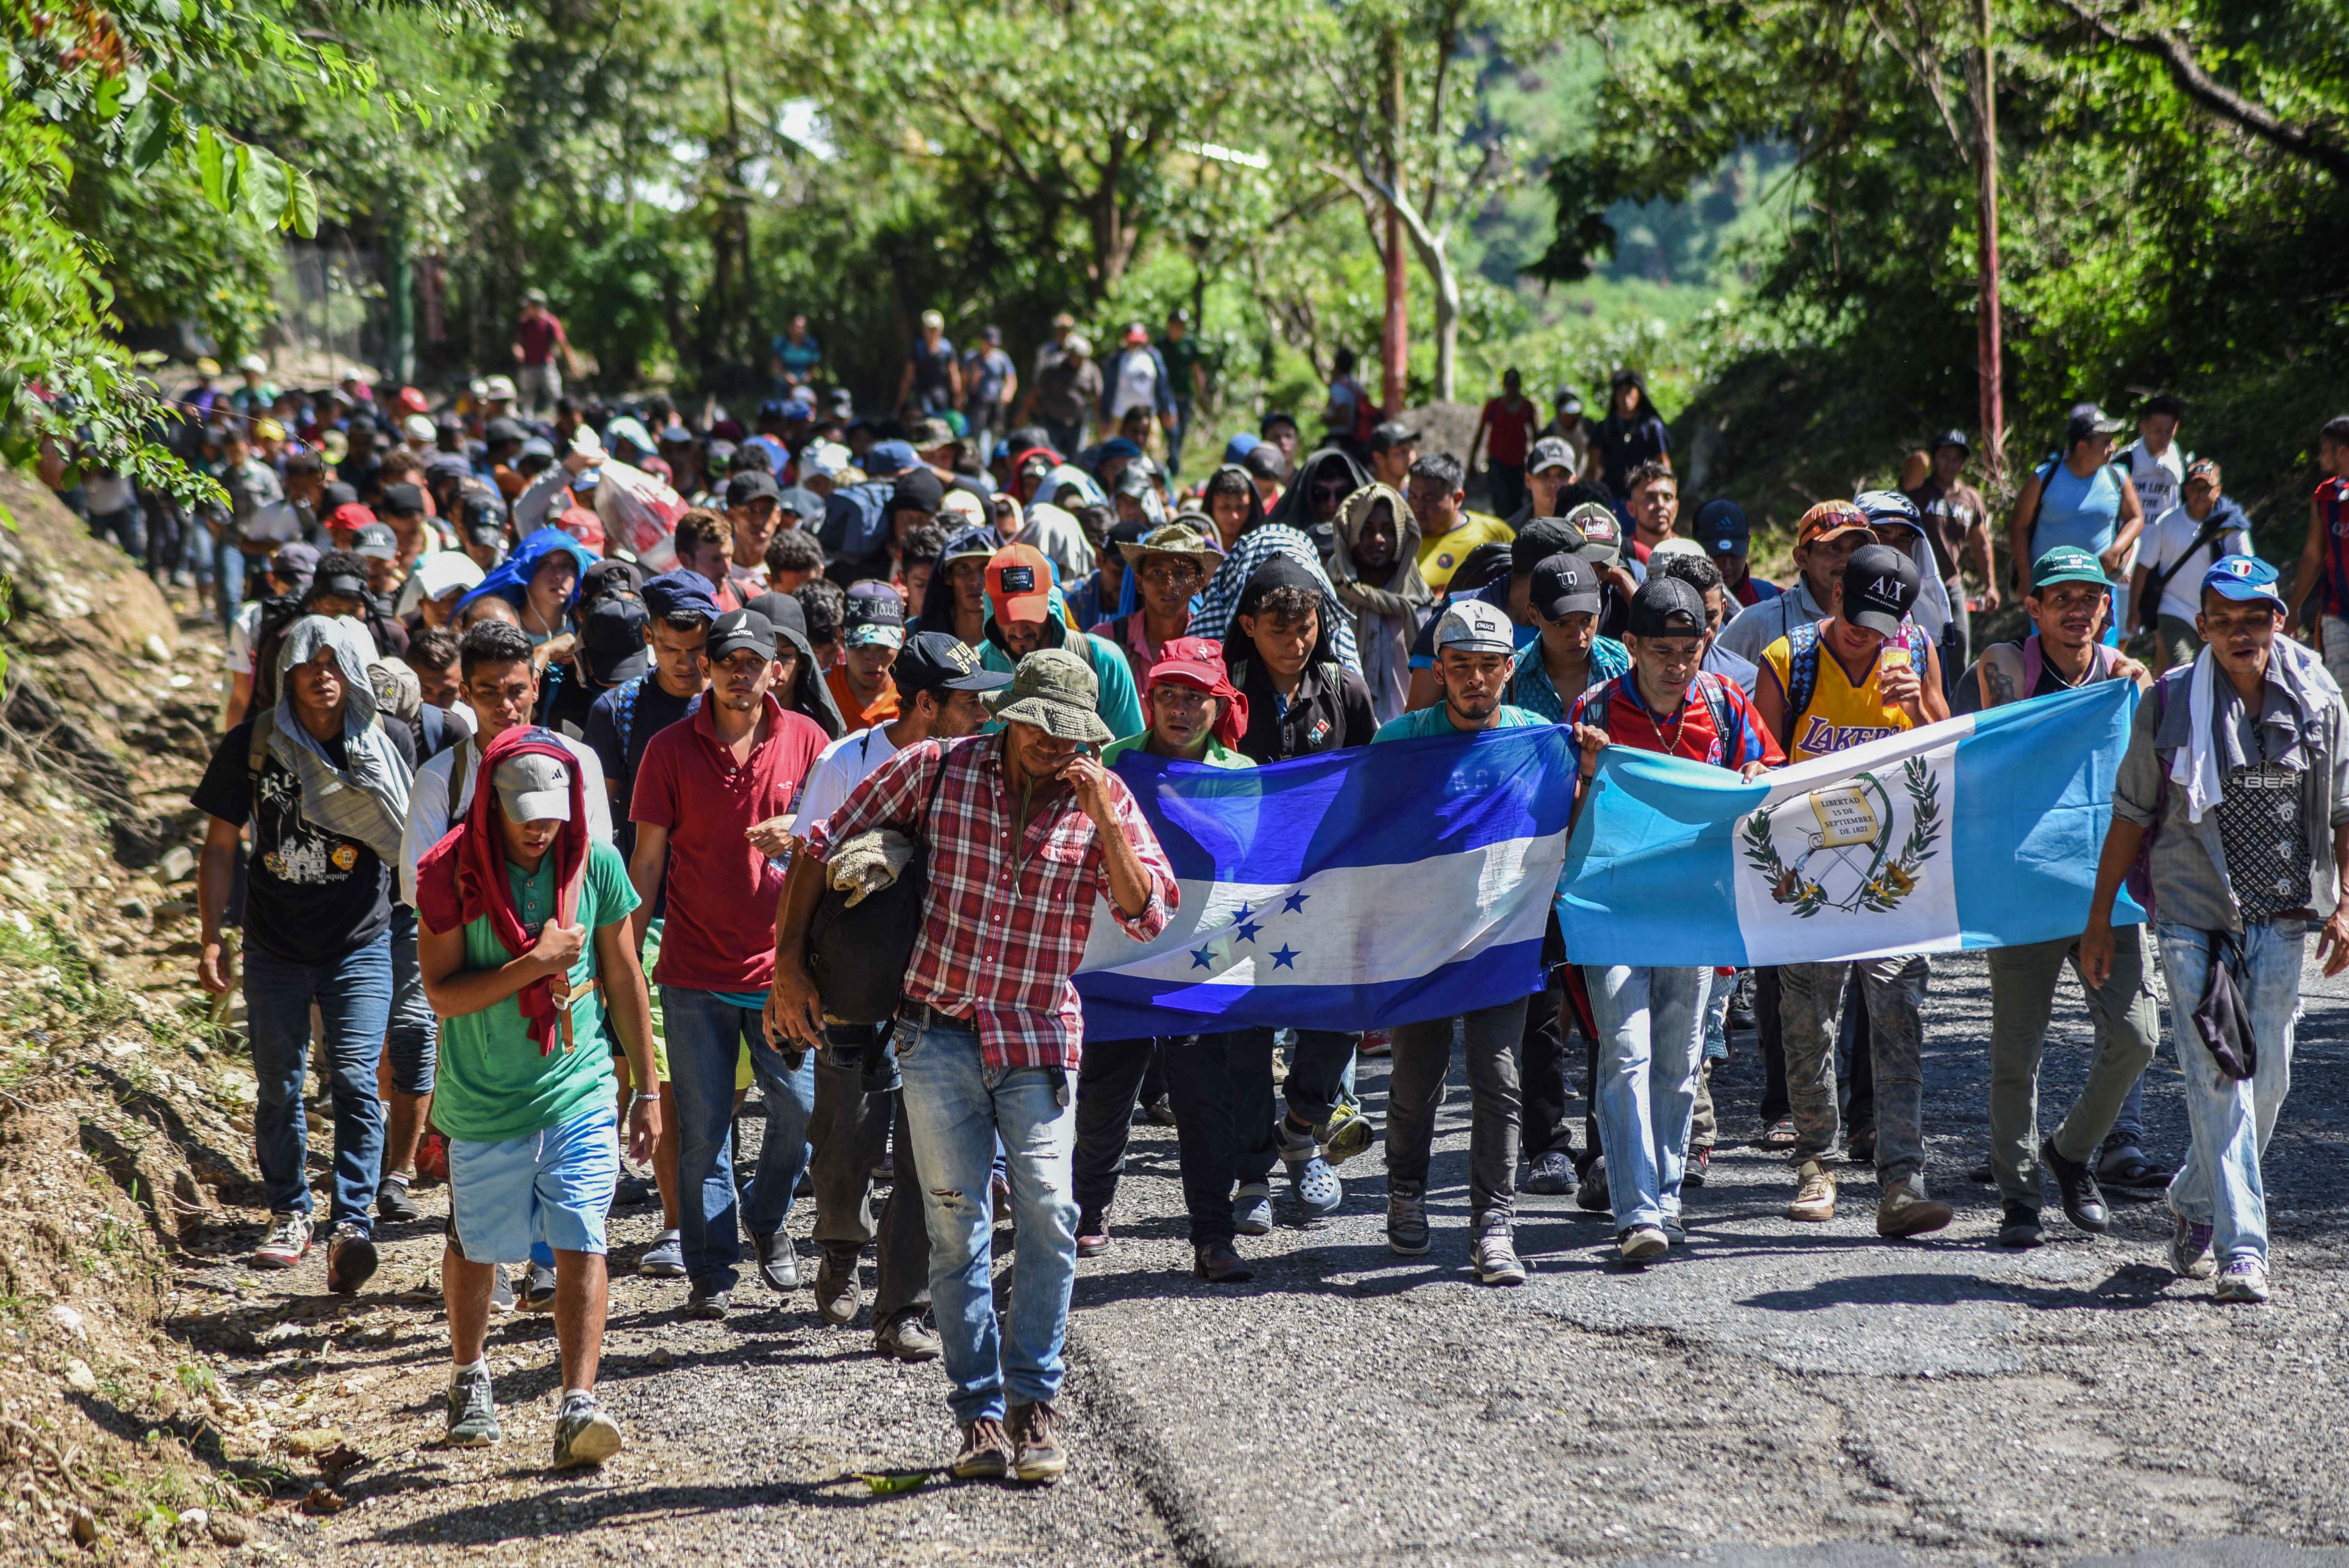 OCT 22: Honduran migrants take part in a new caravan heading to the US with Honduran and Guatemalan national flags in Quezaltepeque, Chiquimula, Guatemala (ORLANDO ESTRADA&mdash;AFP/Getty Images)